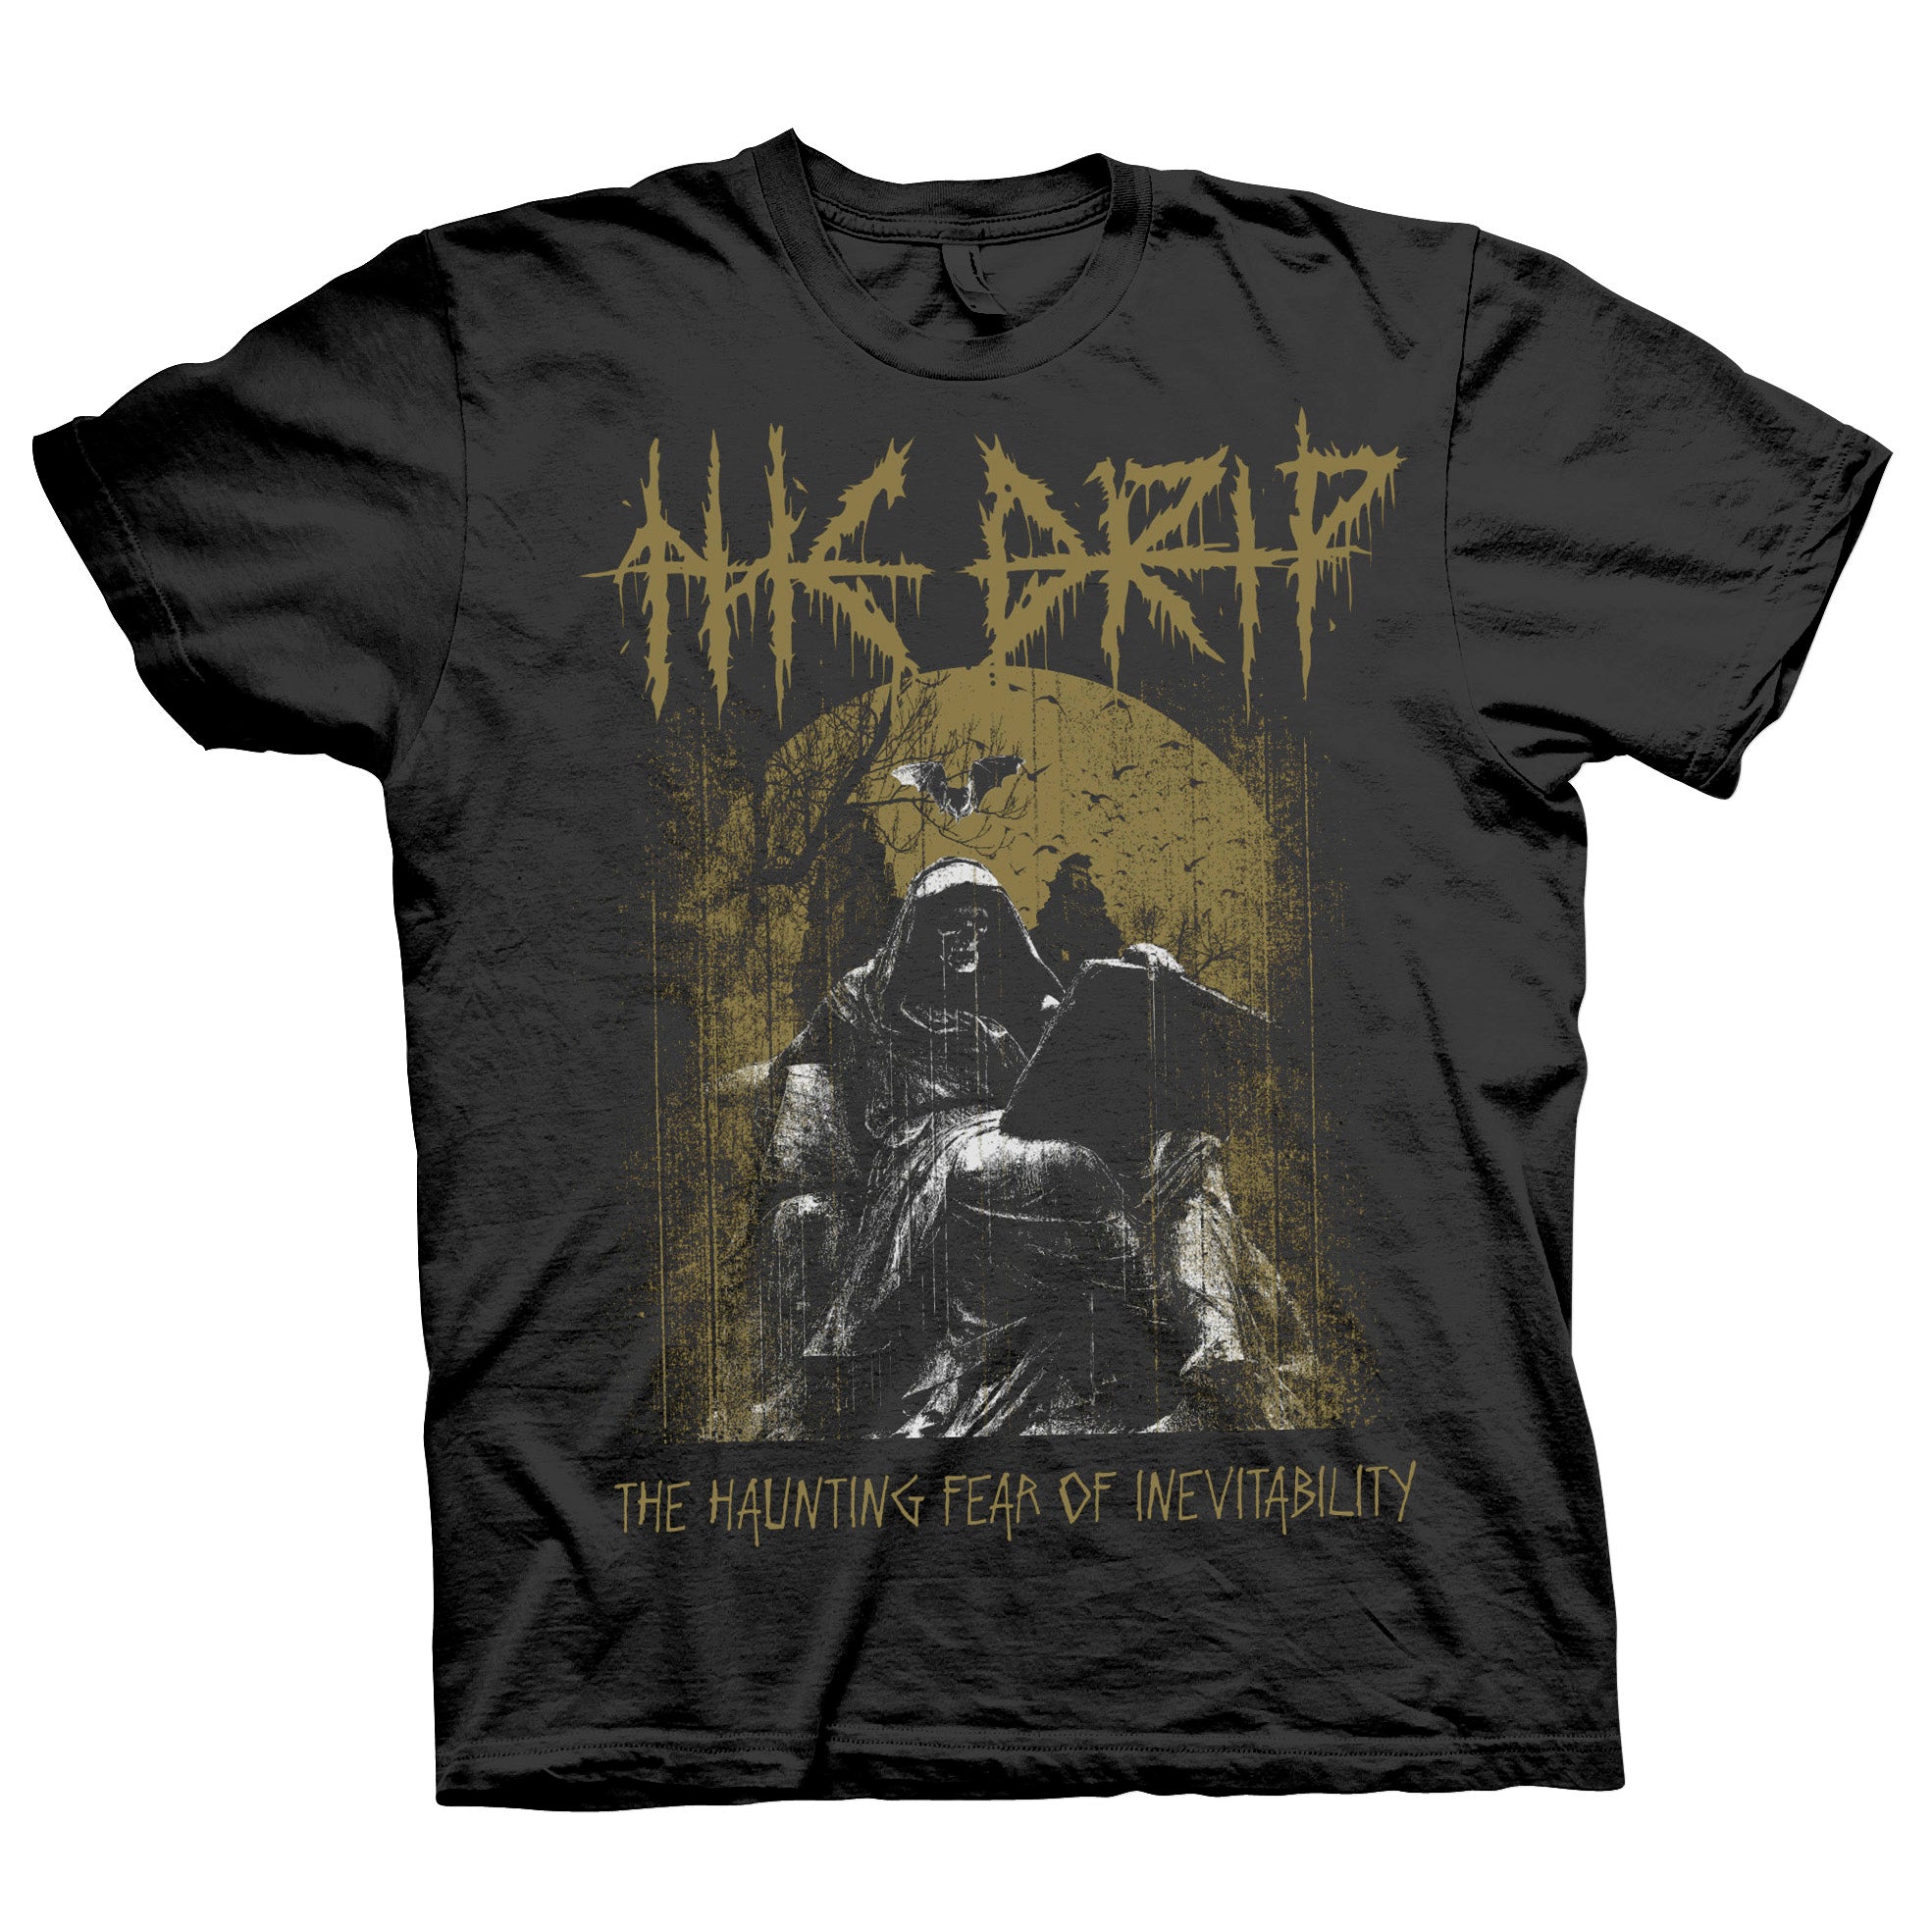 The Drip "The Haunting Fear of Inevitability" T-Shirt